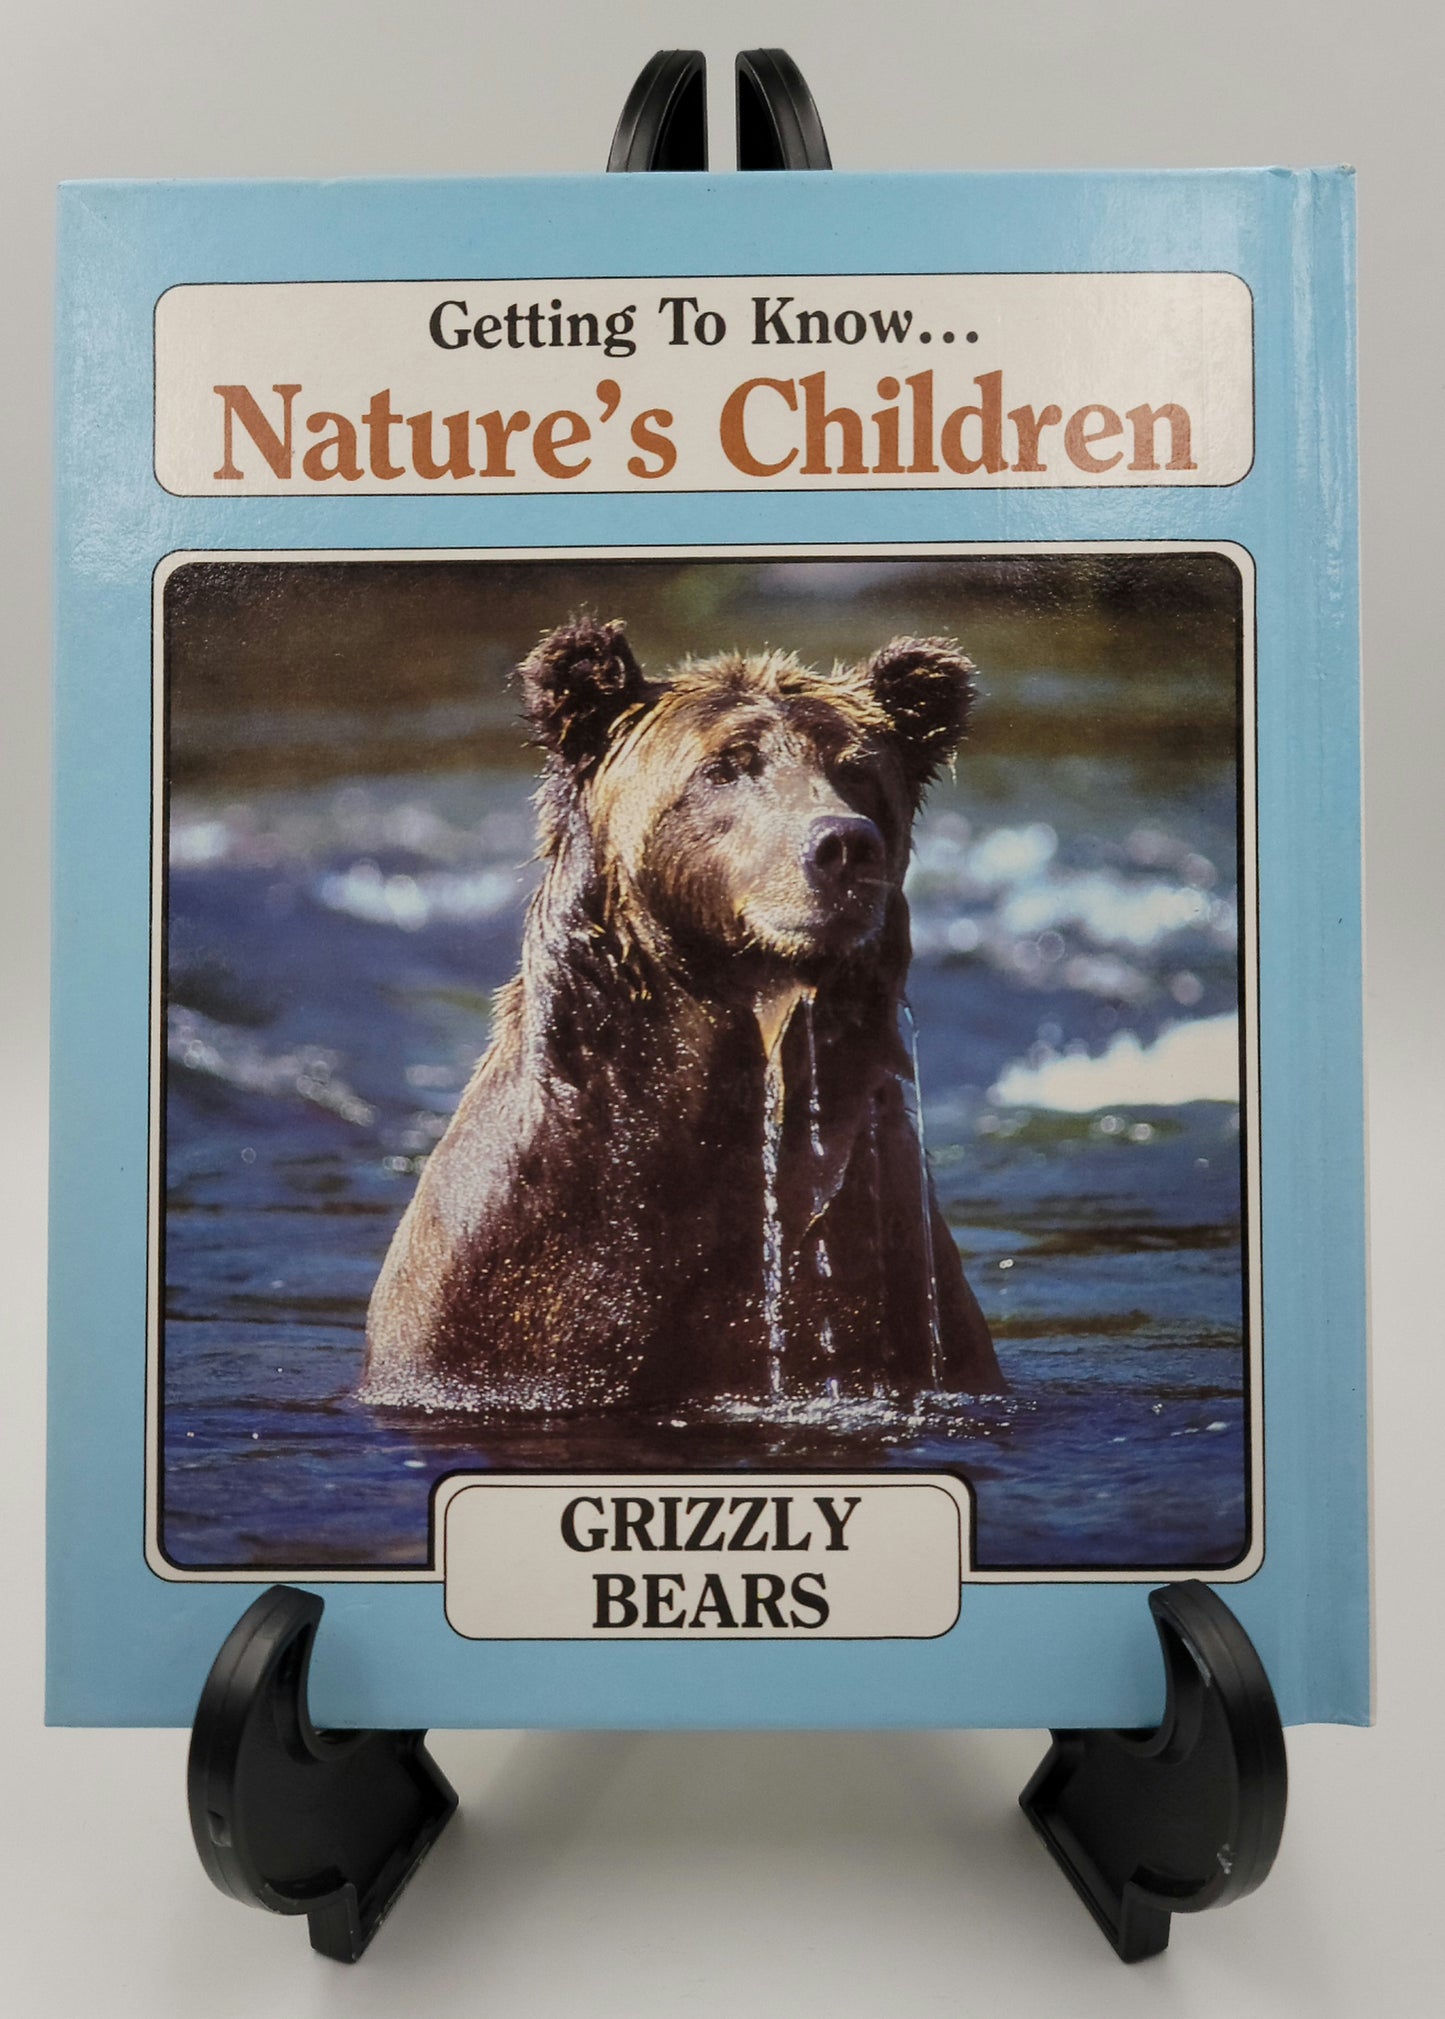 Canada Goose by Judy Ross and Grizzly Bears by Caroline Greenland (Getting to Know... Nature's Children #6)